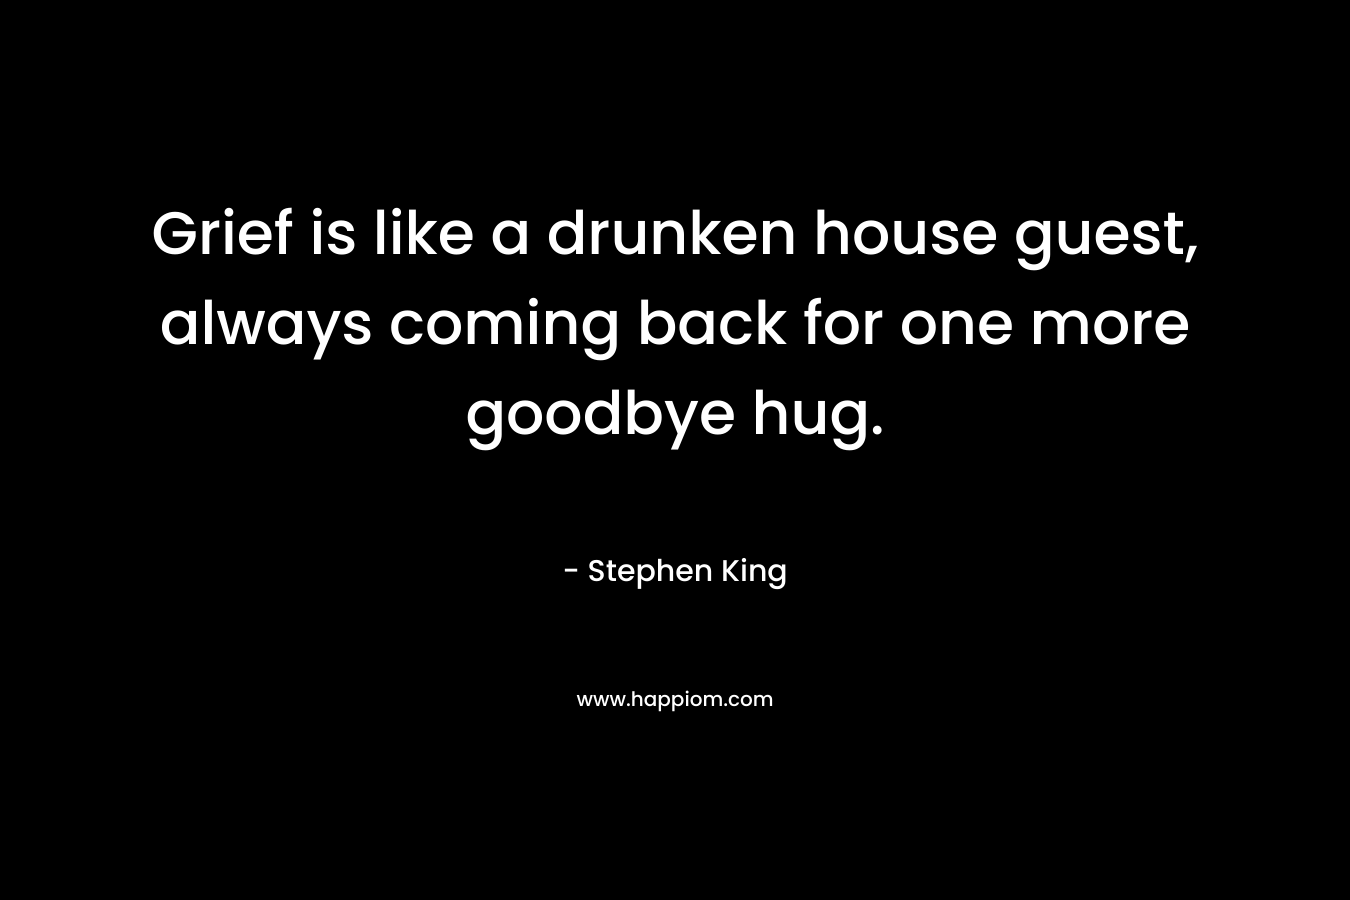 Grief is like a drunken house guest, always coming back for one more goodbye hug. – Stephen King